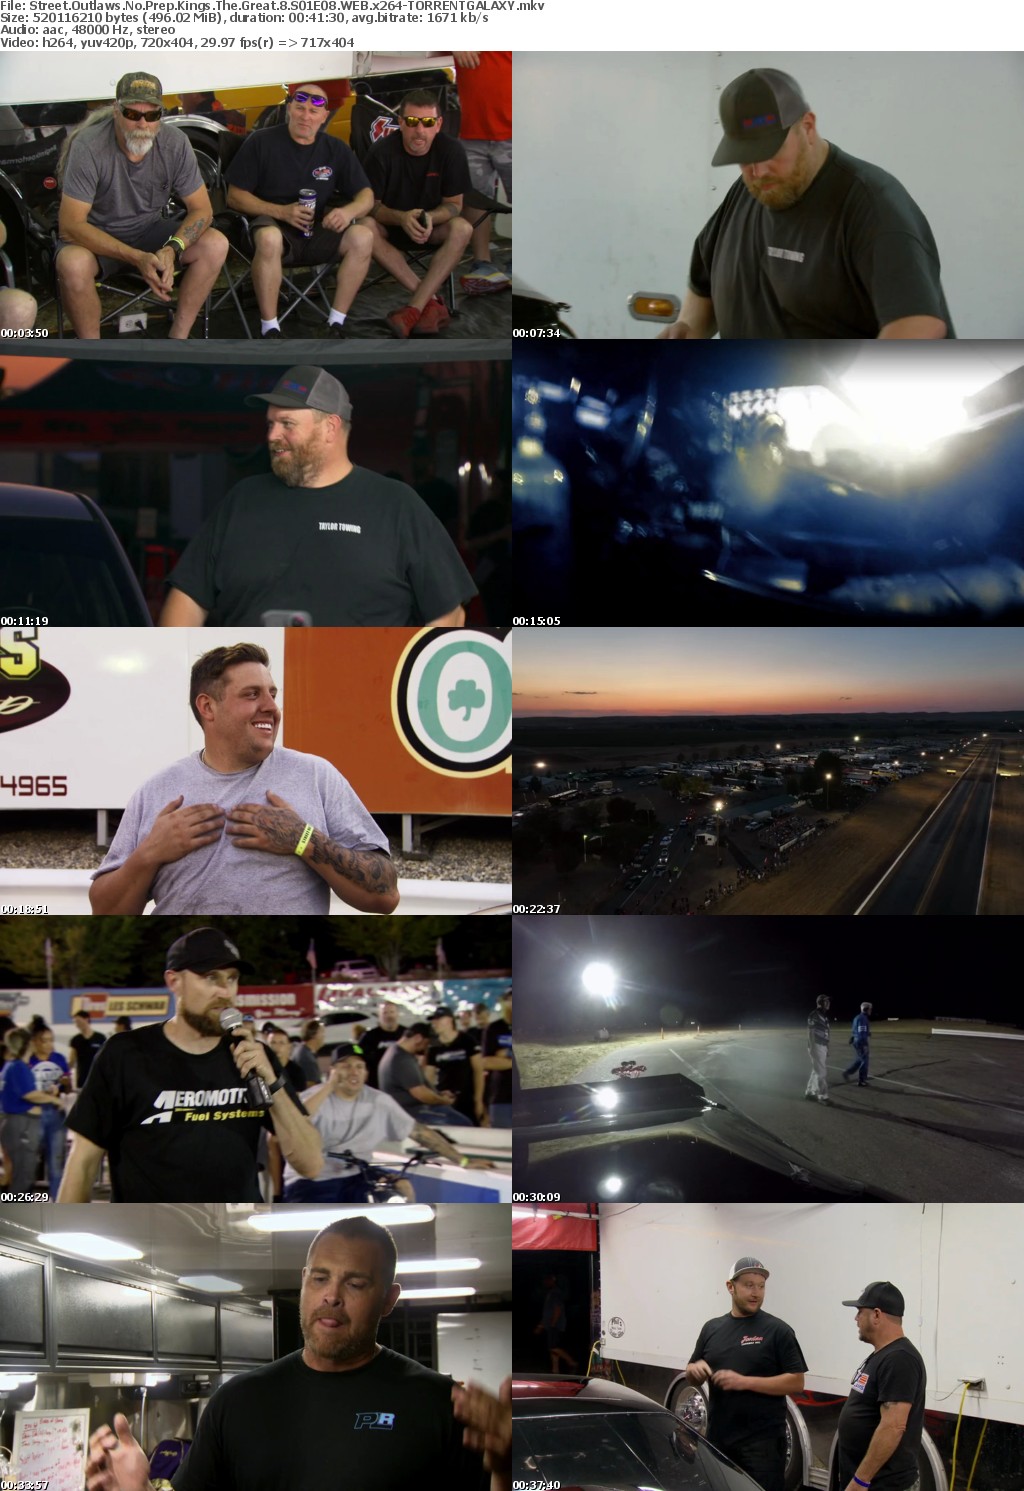 Street Outlaws No Prep Kings The Great 8 S01E08 WEB x264-GALAXY